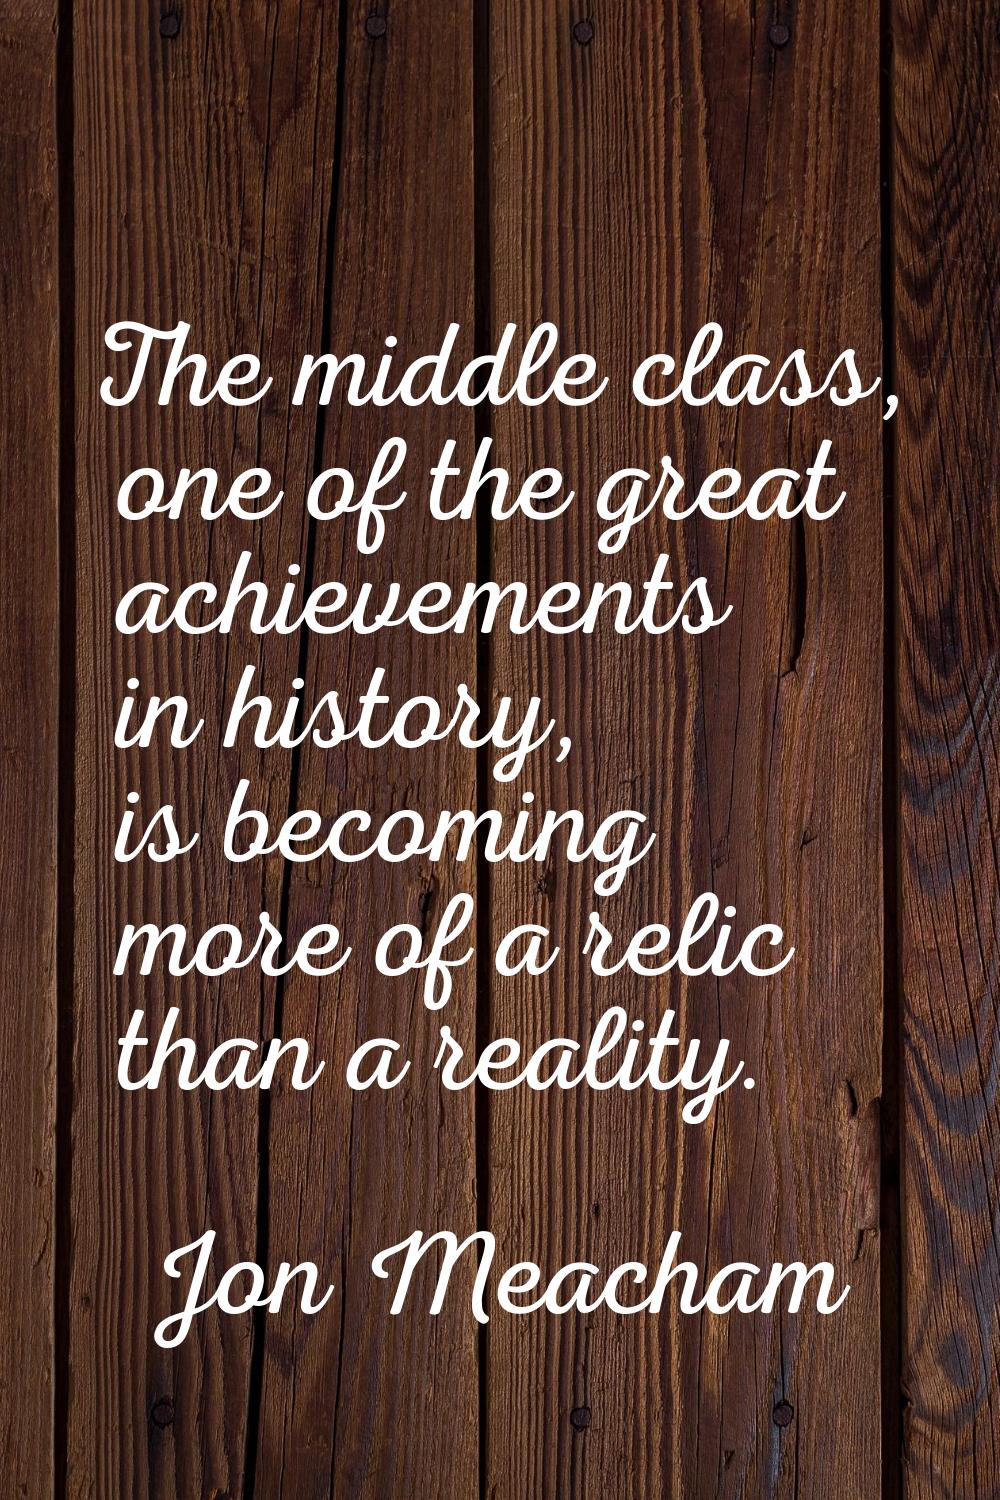 The middle class, one of the great achievements in history, is becoming more of a relic than a real